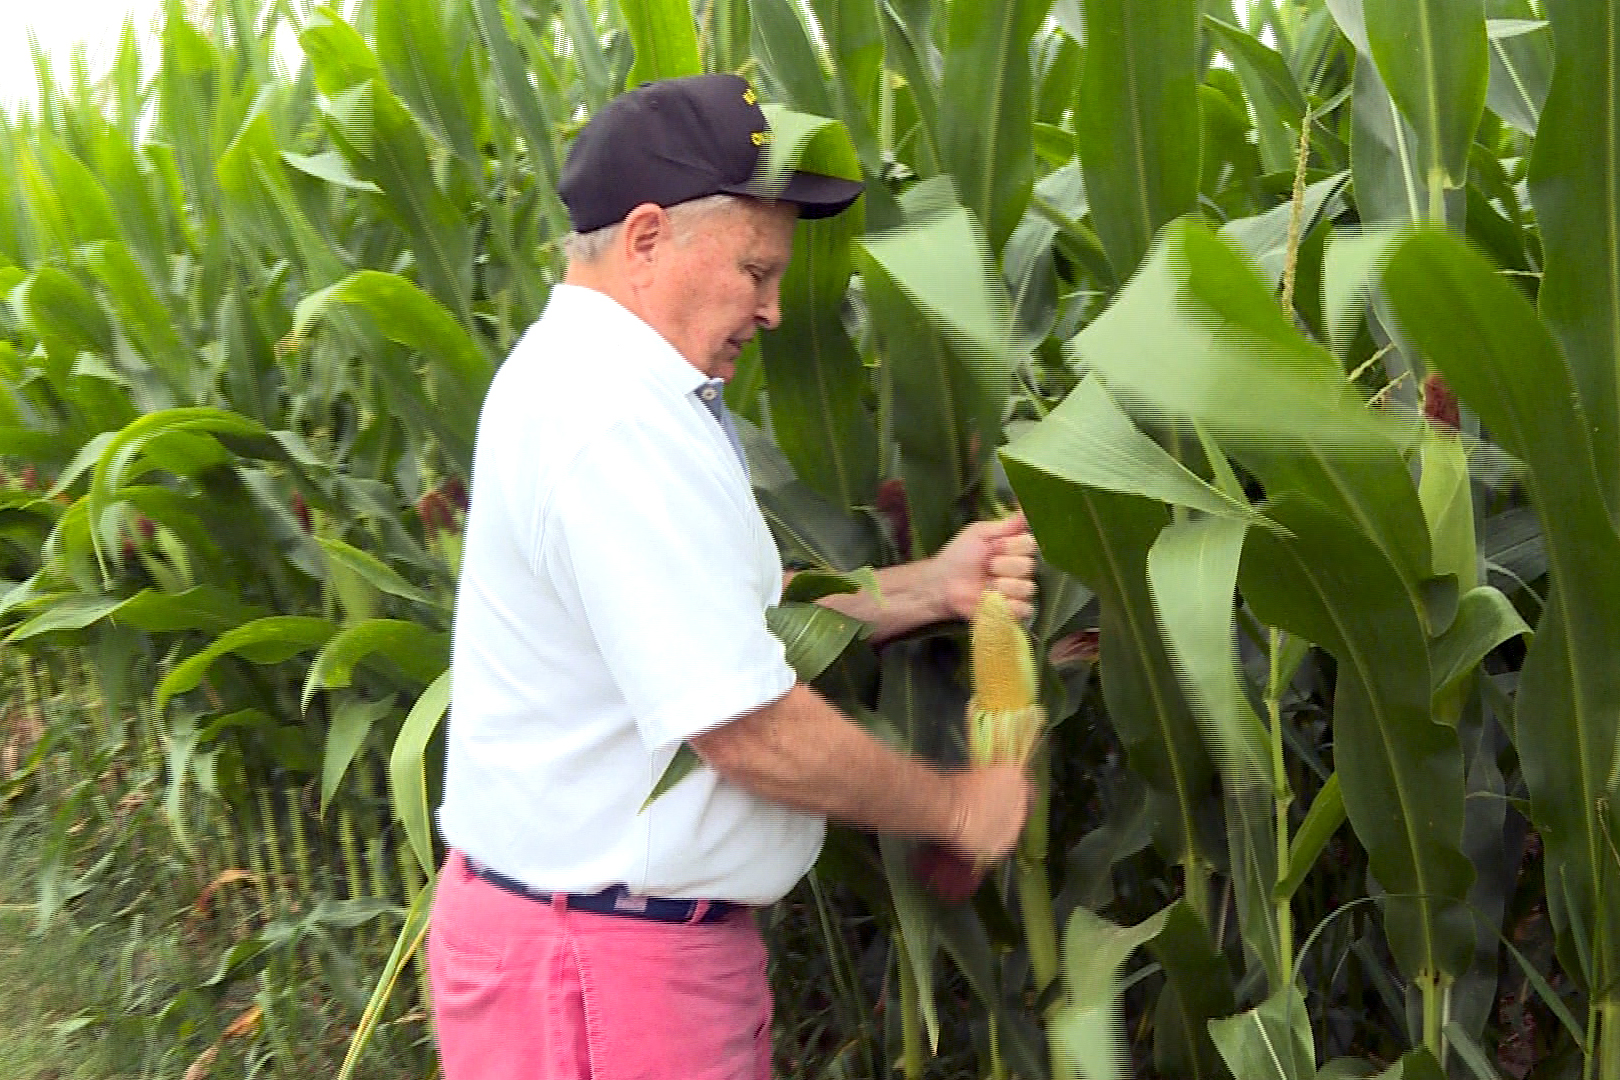 Miers examines an ear of corn in one of his fields.